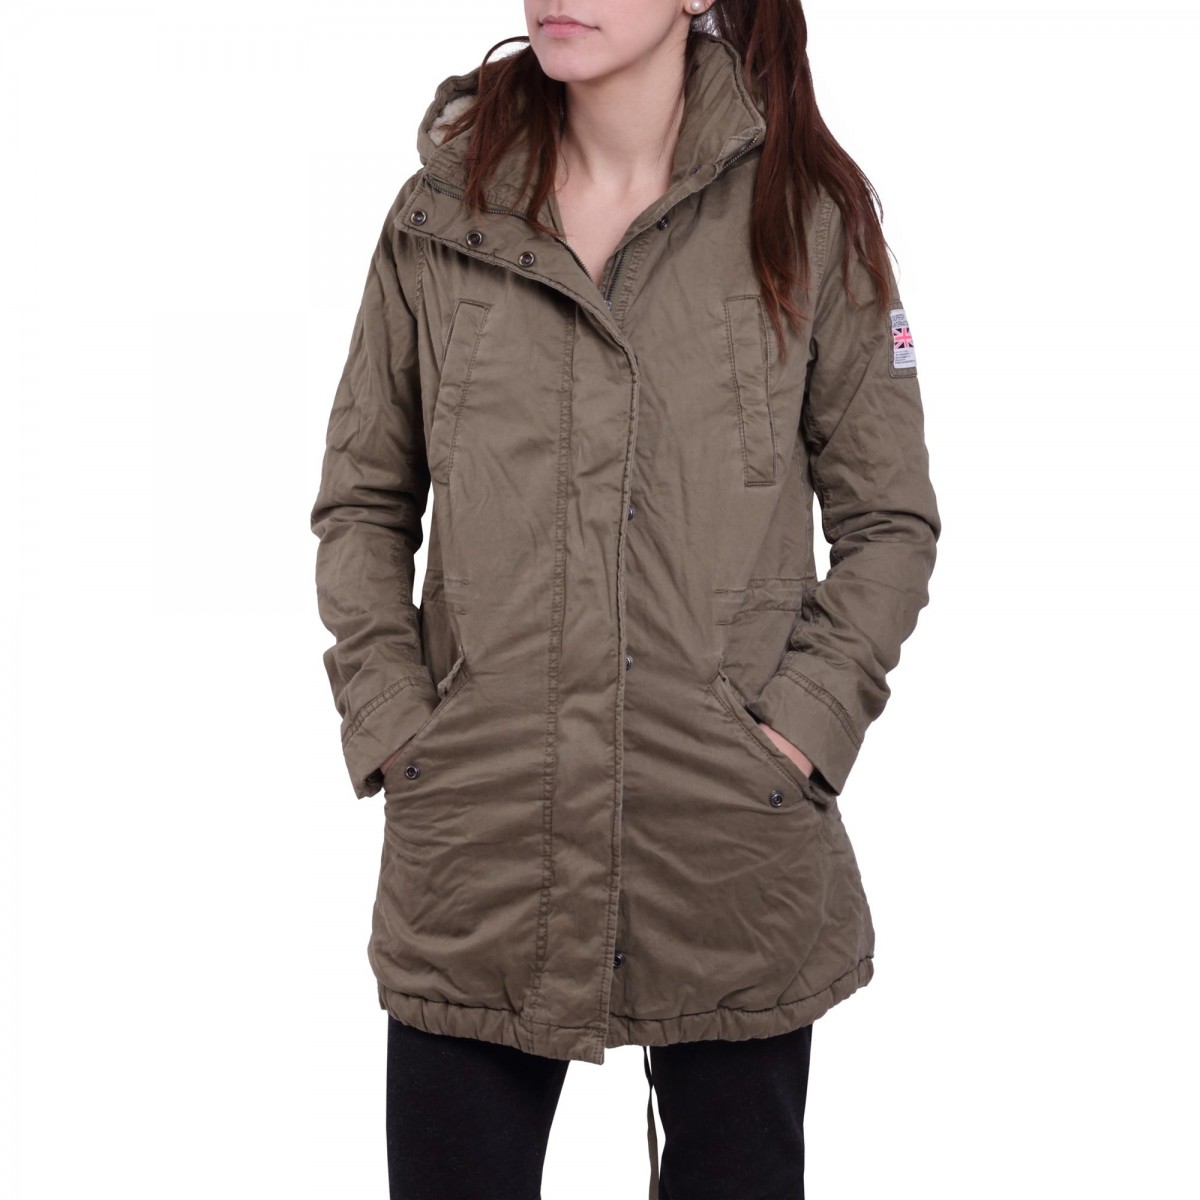 WINTER ROOKIE MILITARY PARKA